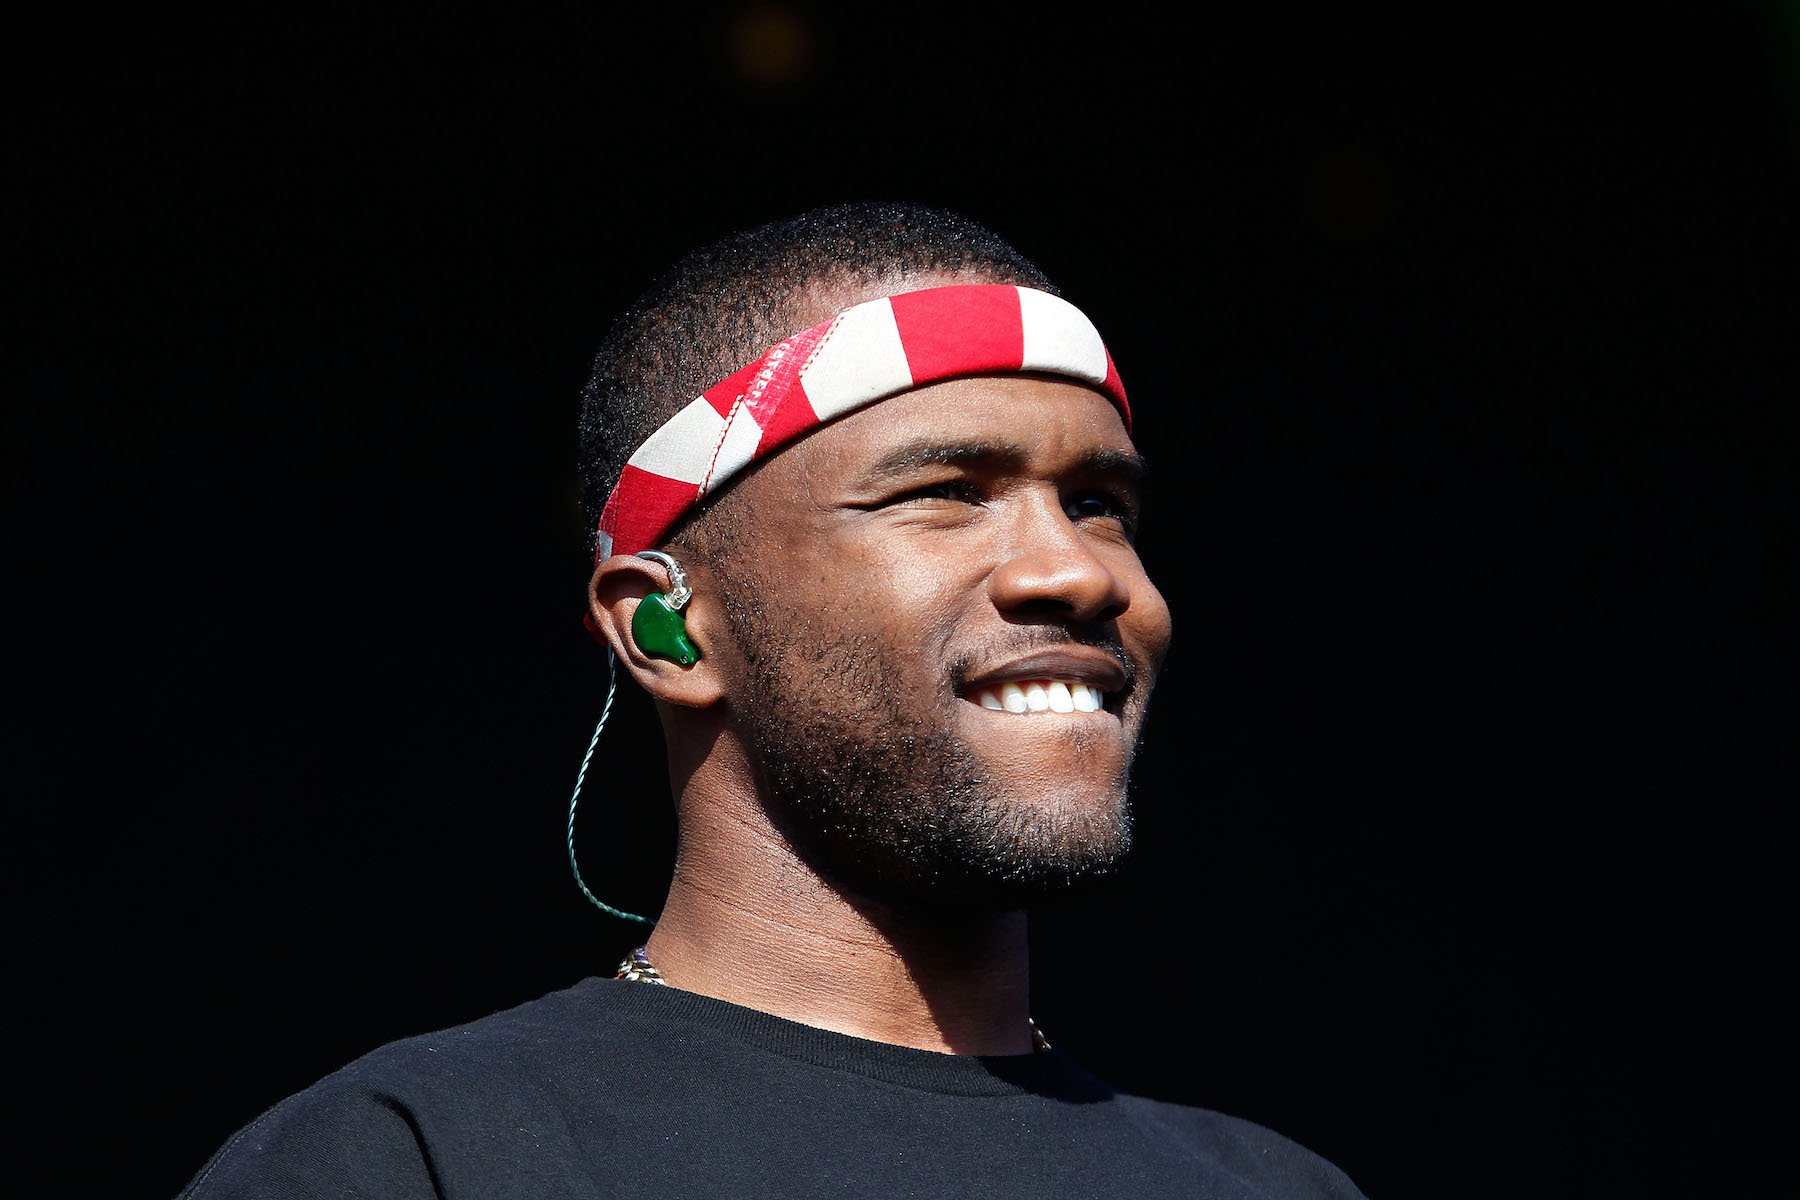 Frank Ocean, once believed to be retiring, smiling wearing a red striped bandana